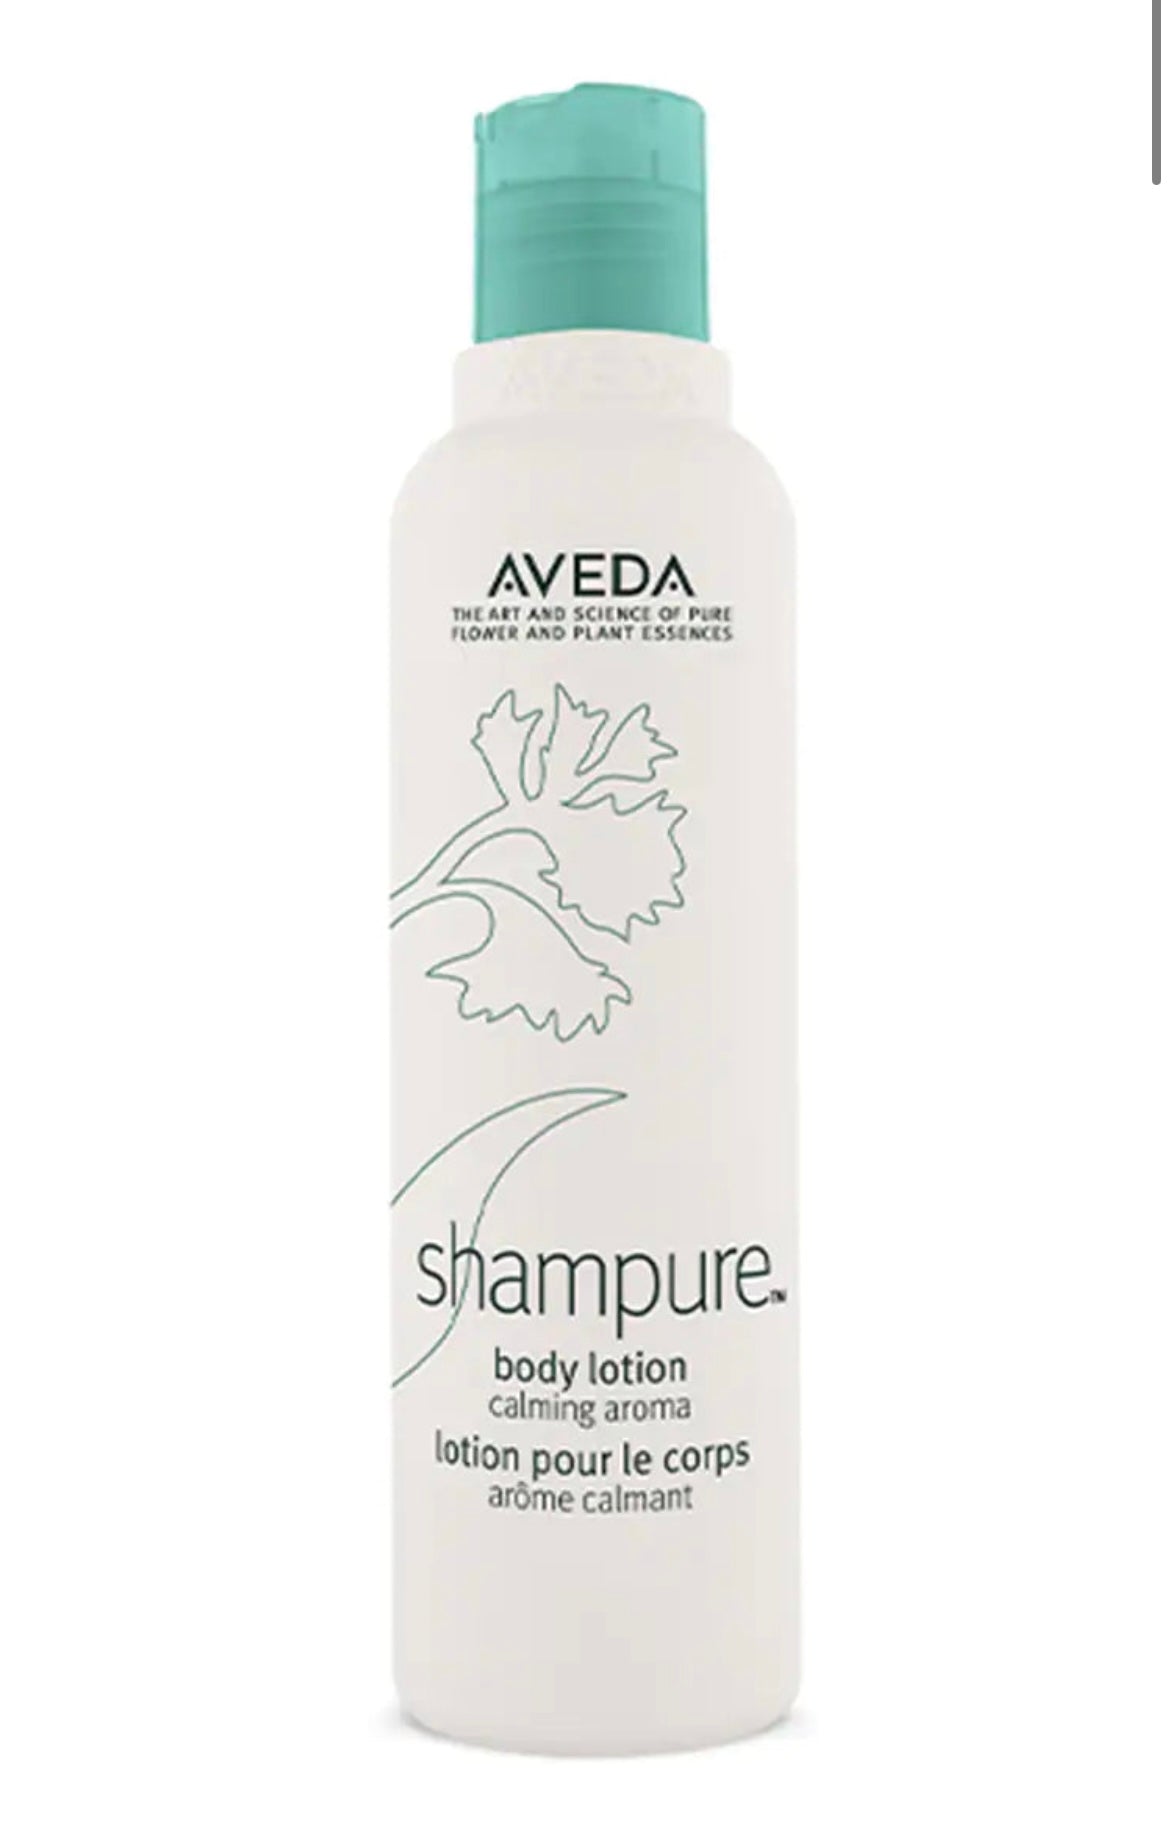 Shampure body lotion (Was £27) Now £15